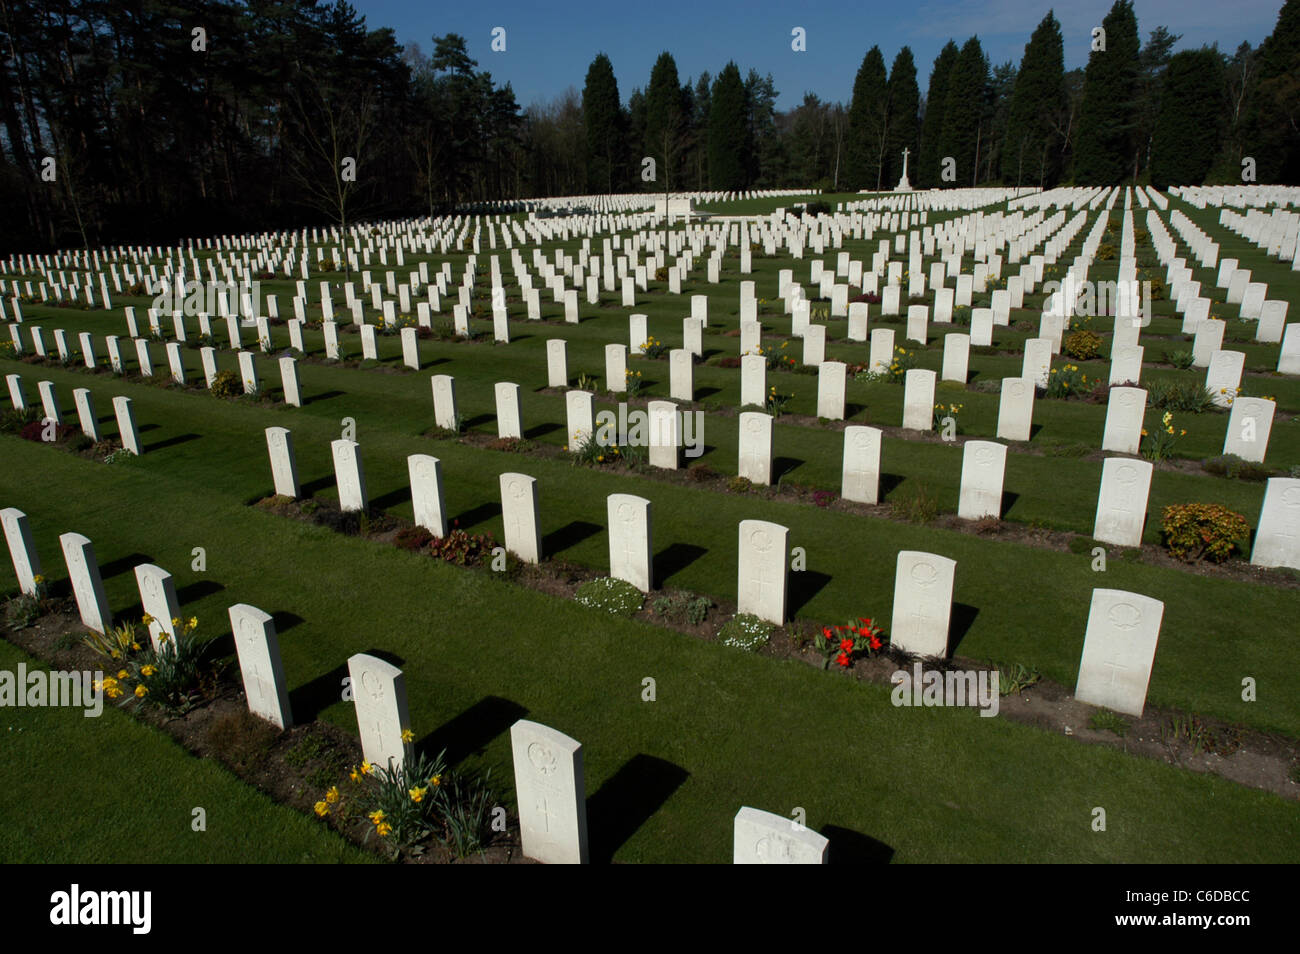 Brookwood Military Cemetery,Surrey, England. Maintained by the Commonwealth War Graves Commission, CWGC. Stock Photo